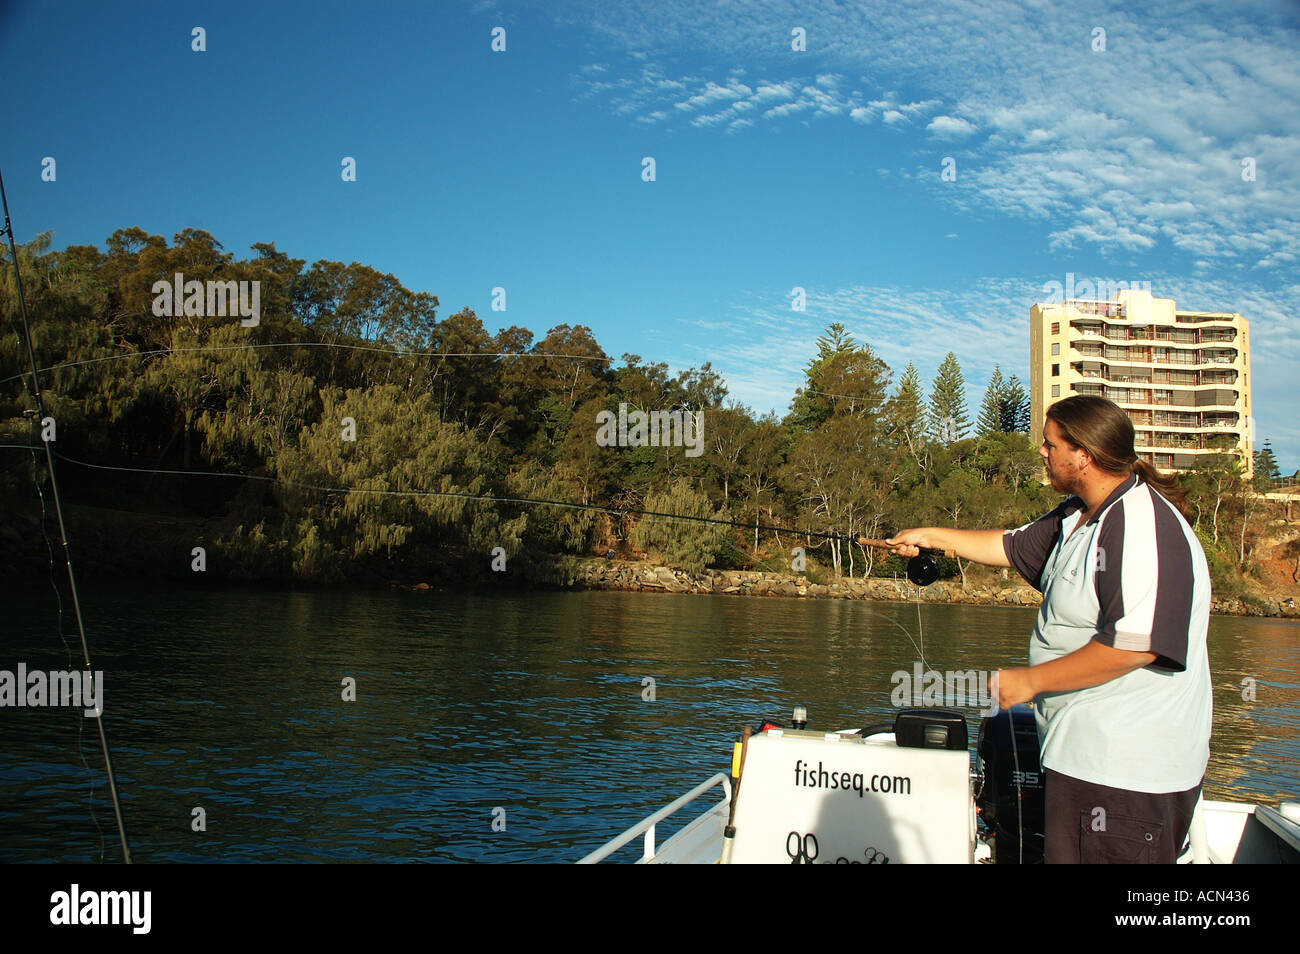 Saltwater Fly fishing from boat Moloolaba Queensland Australia dsc 1532  Stock Photo - Alamy